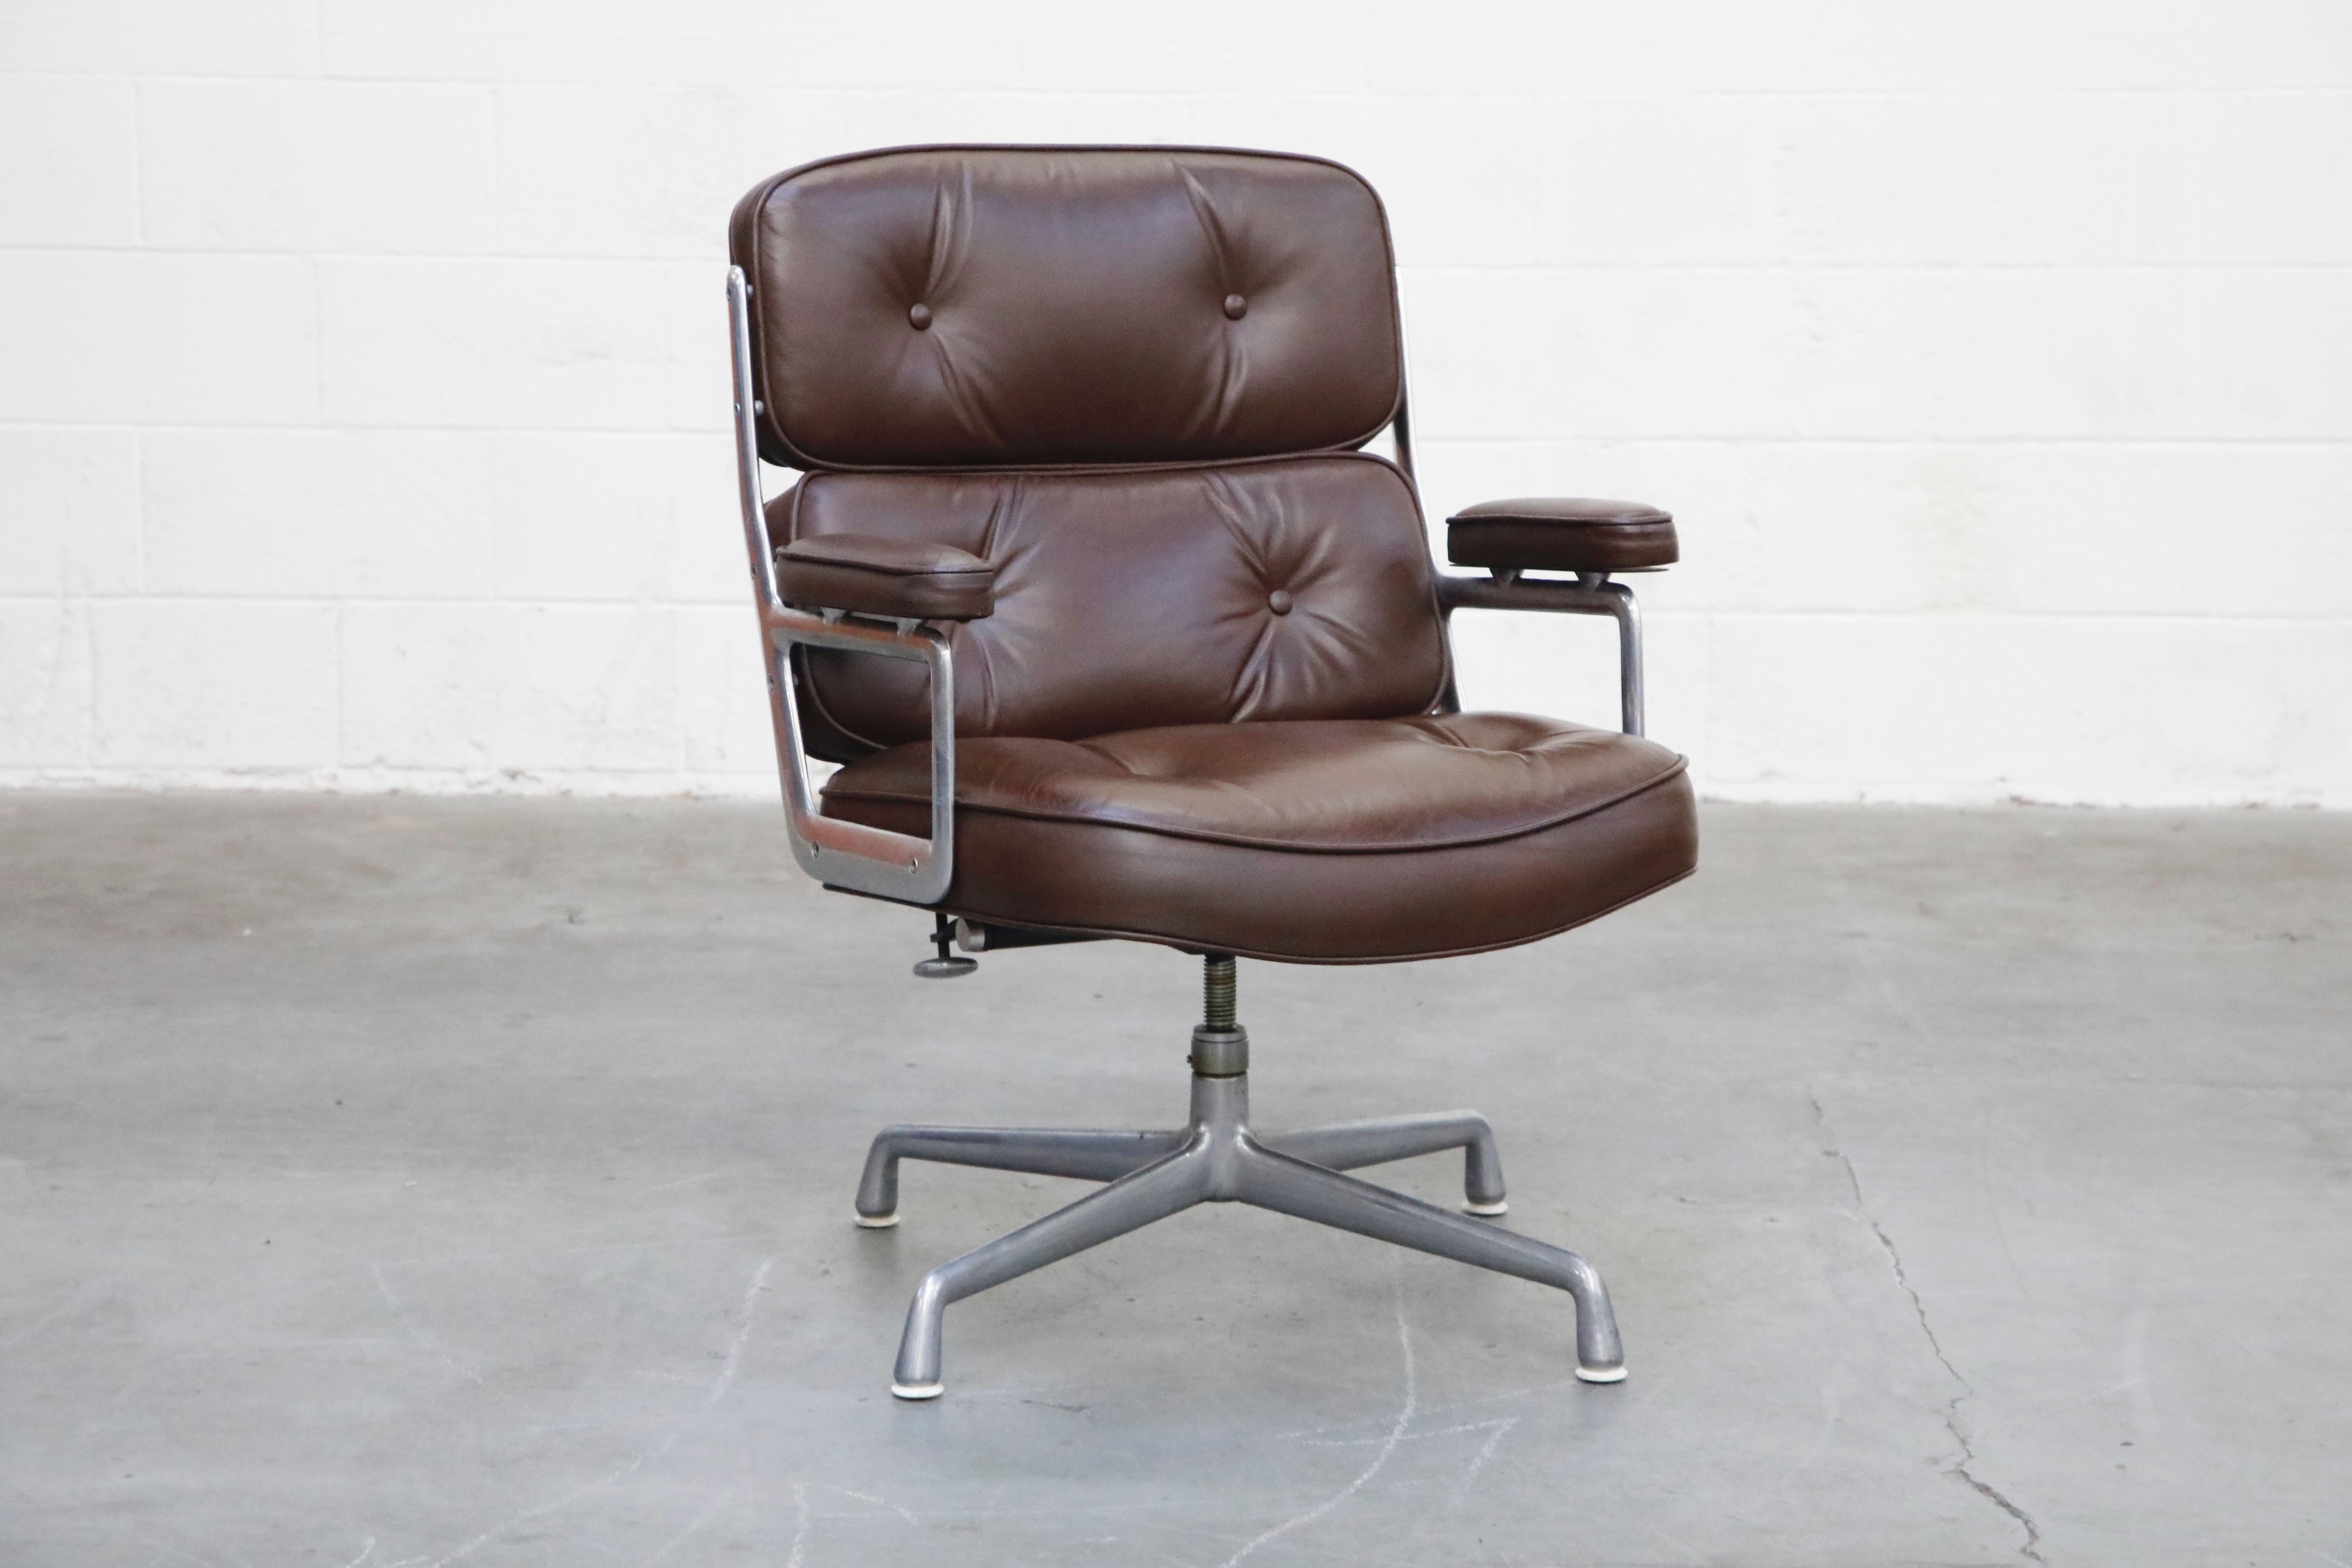 Mid-Century Modern Time Life Swivel Lounge Chairs by Charles Eames for Herman Miller, 1977, Signed